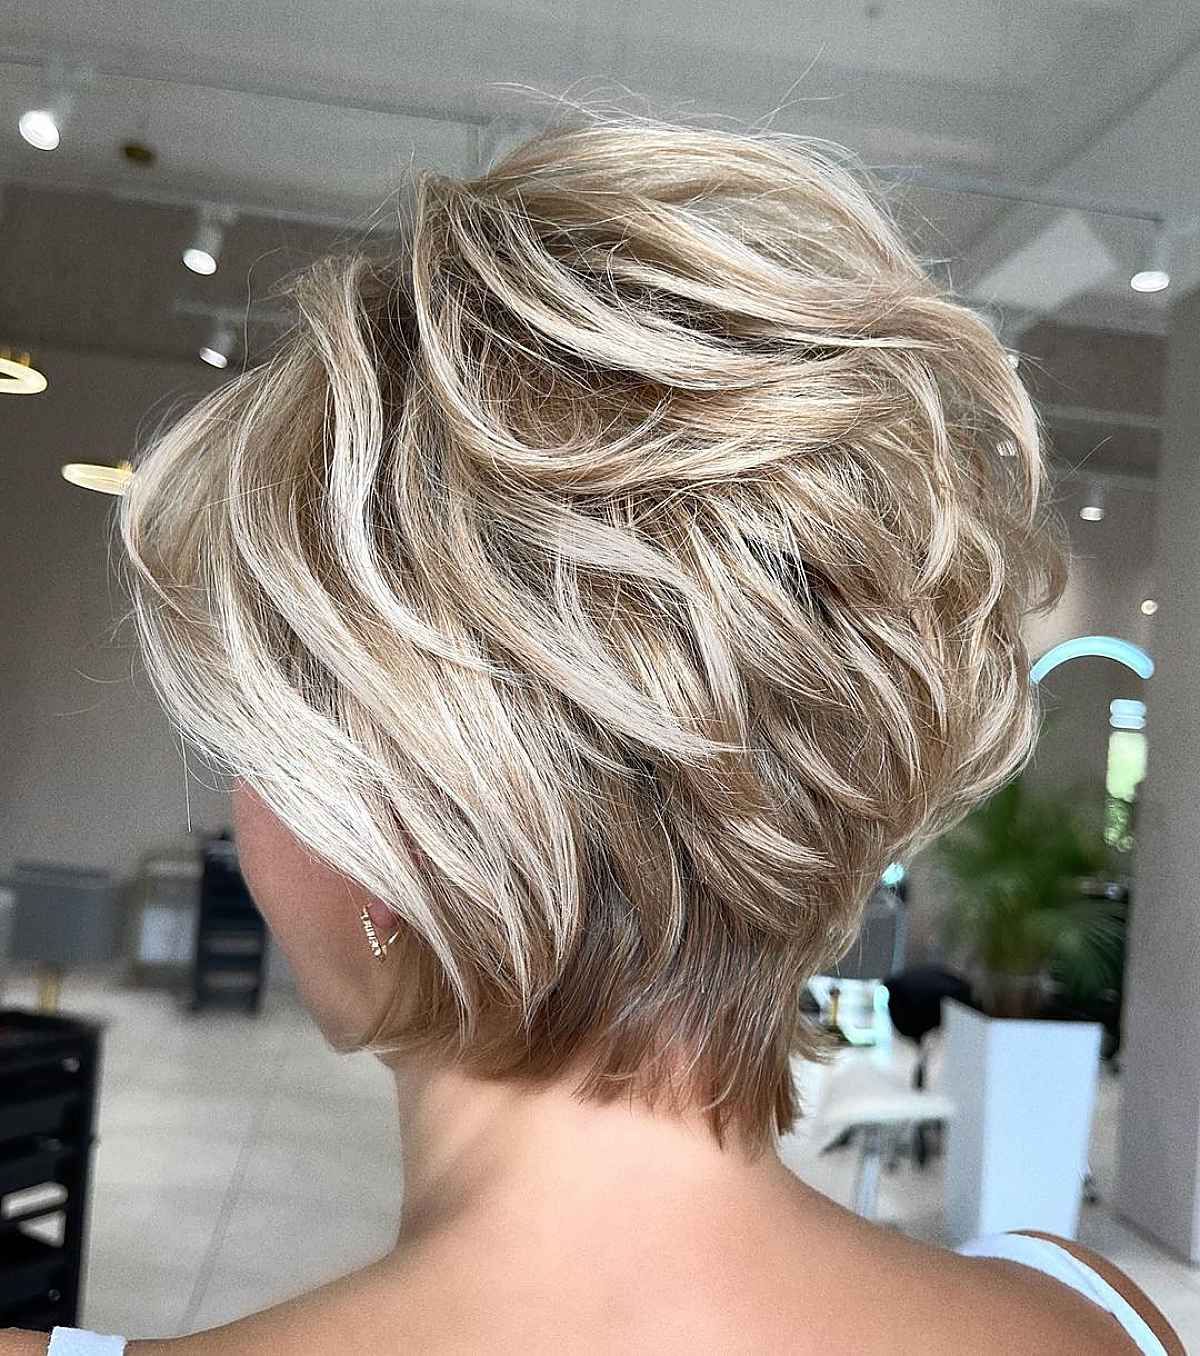 31 Chic Layered Long Pixie Cut Ideas You Can Totally Pull Off Intended For Layered Long Pixie Hairstyles (View 3 of 20)